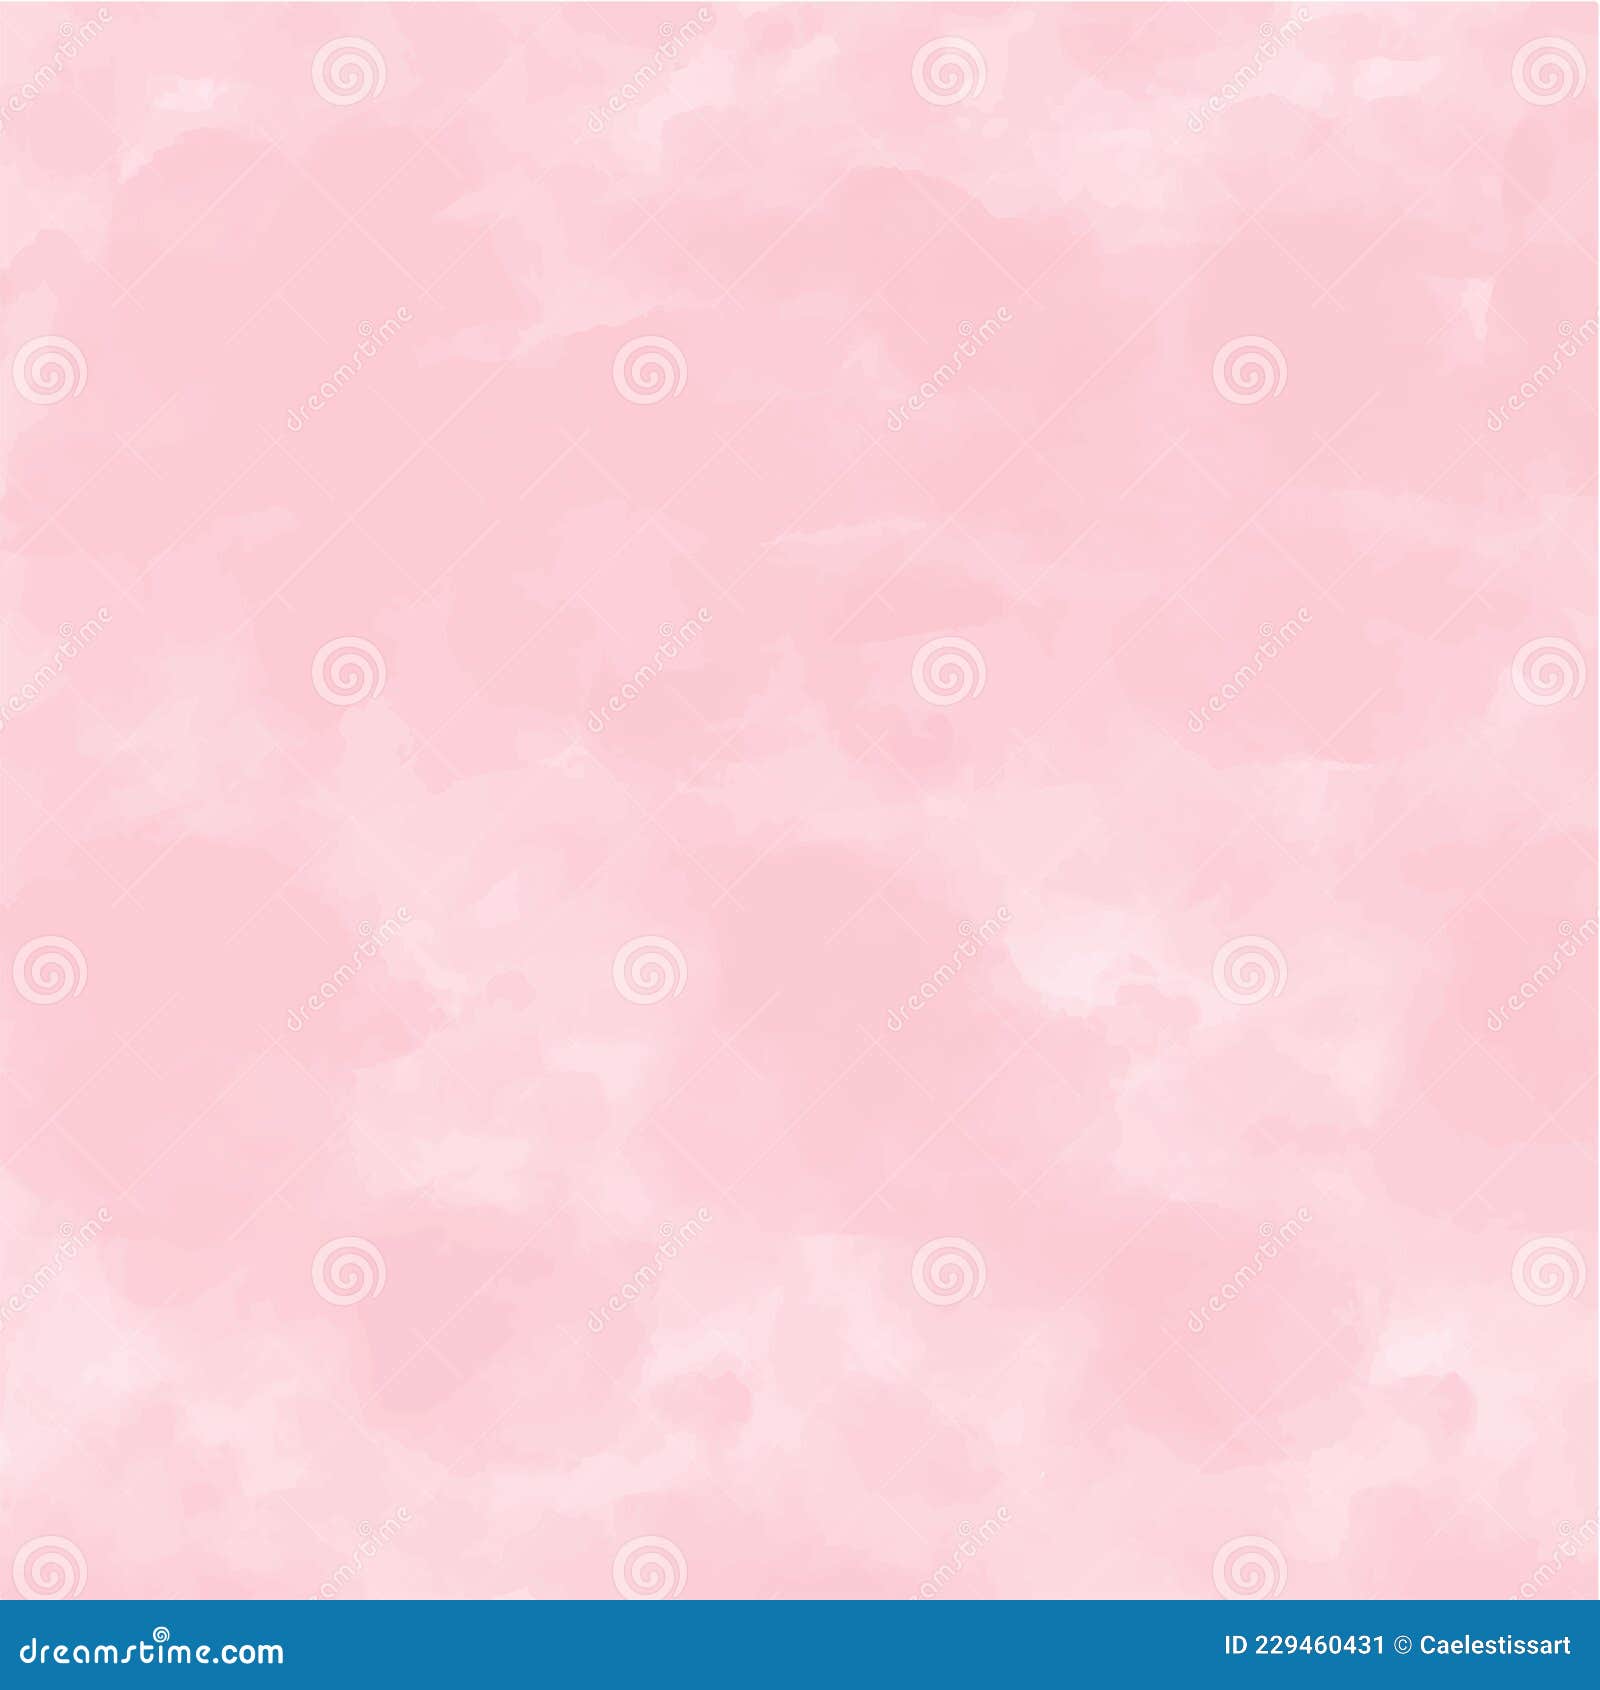 Pink pastel paper texture background 7262026 Stock Photo at Vecteezy